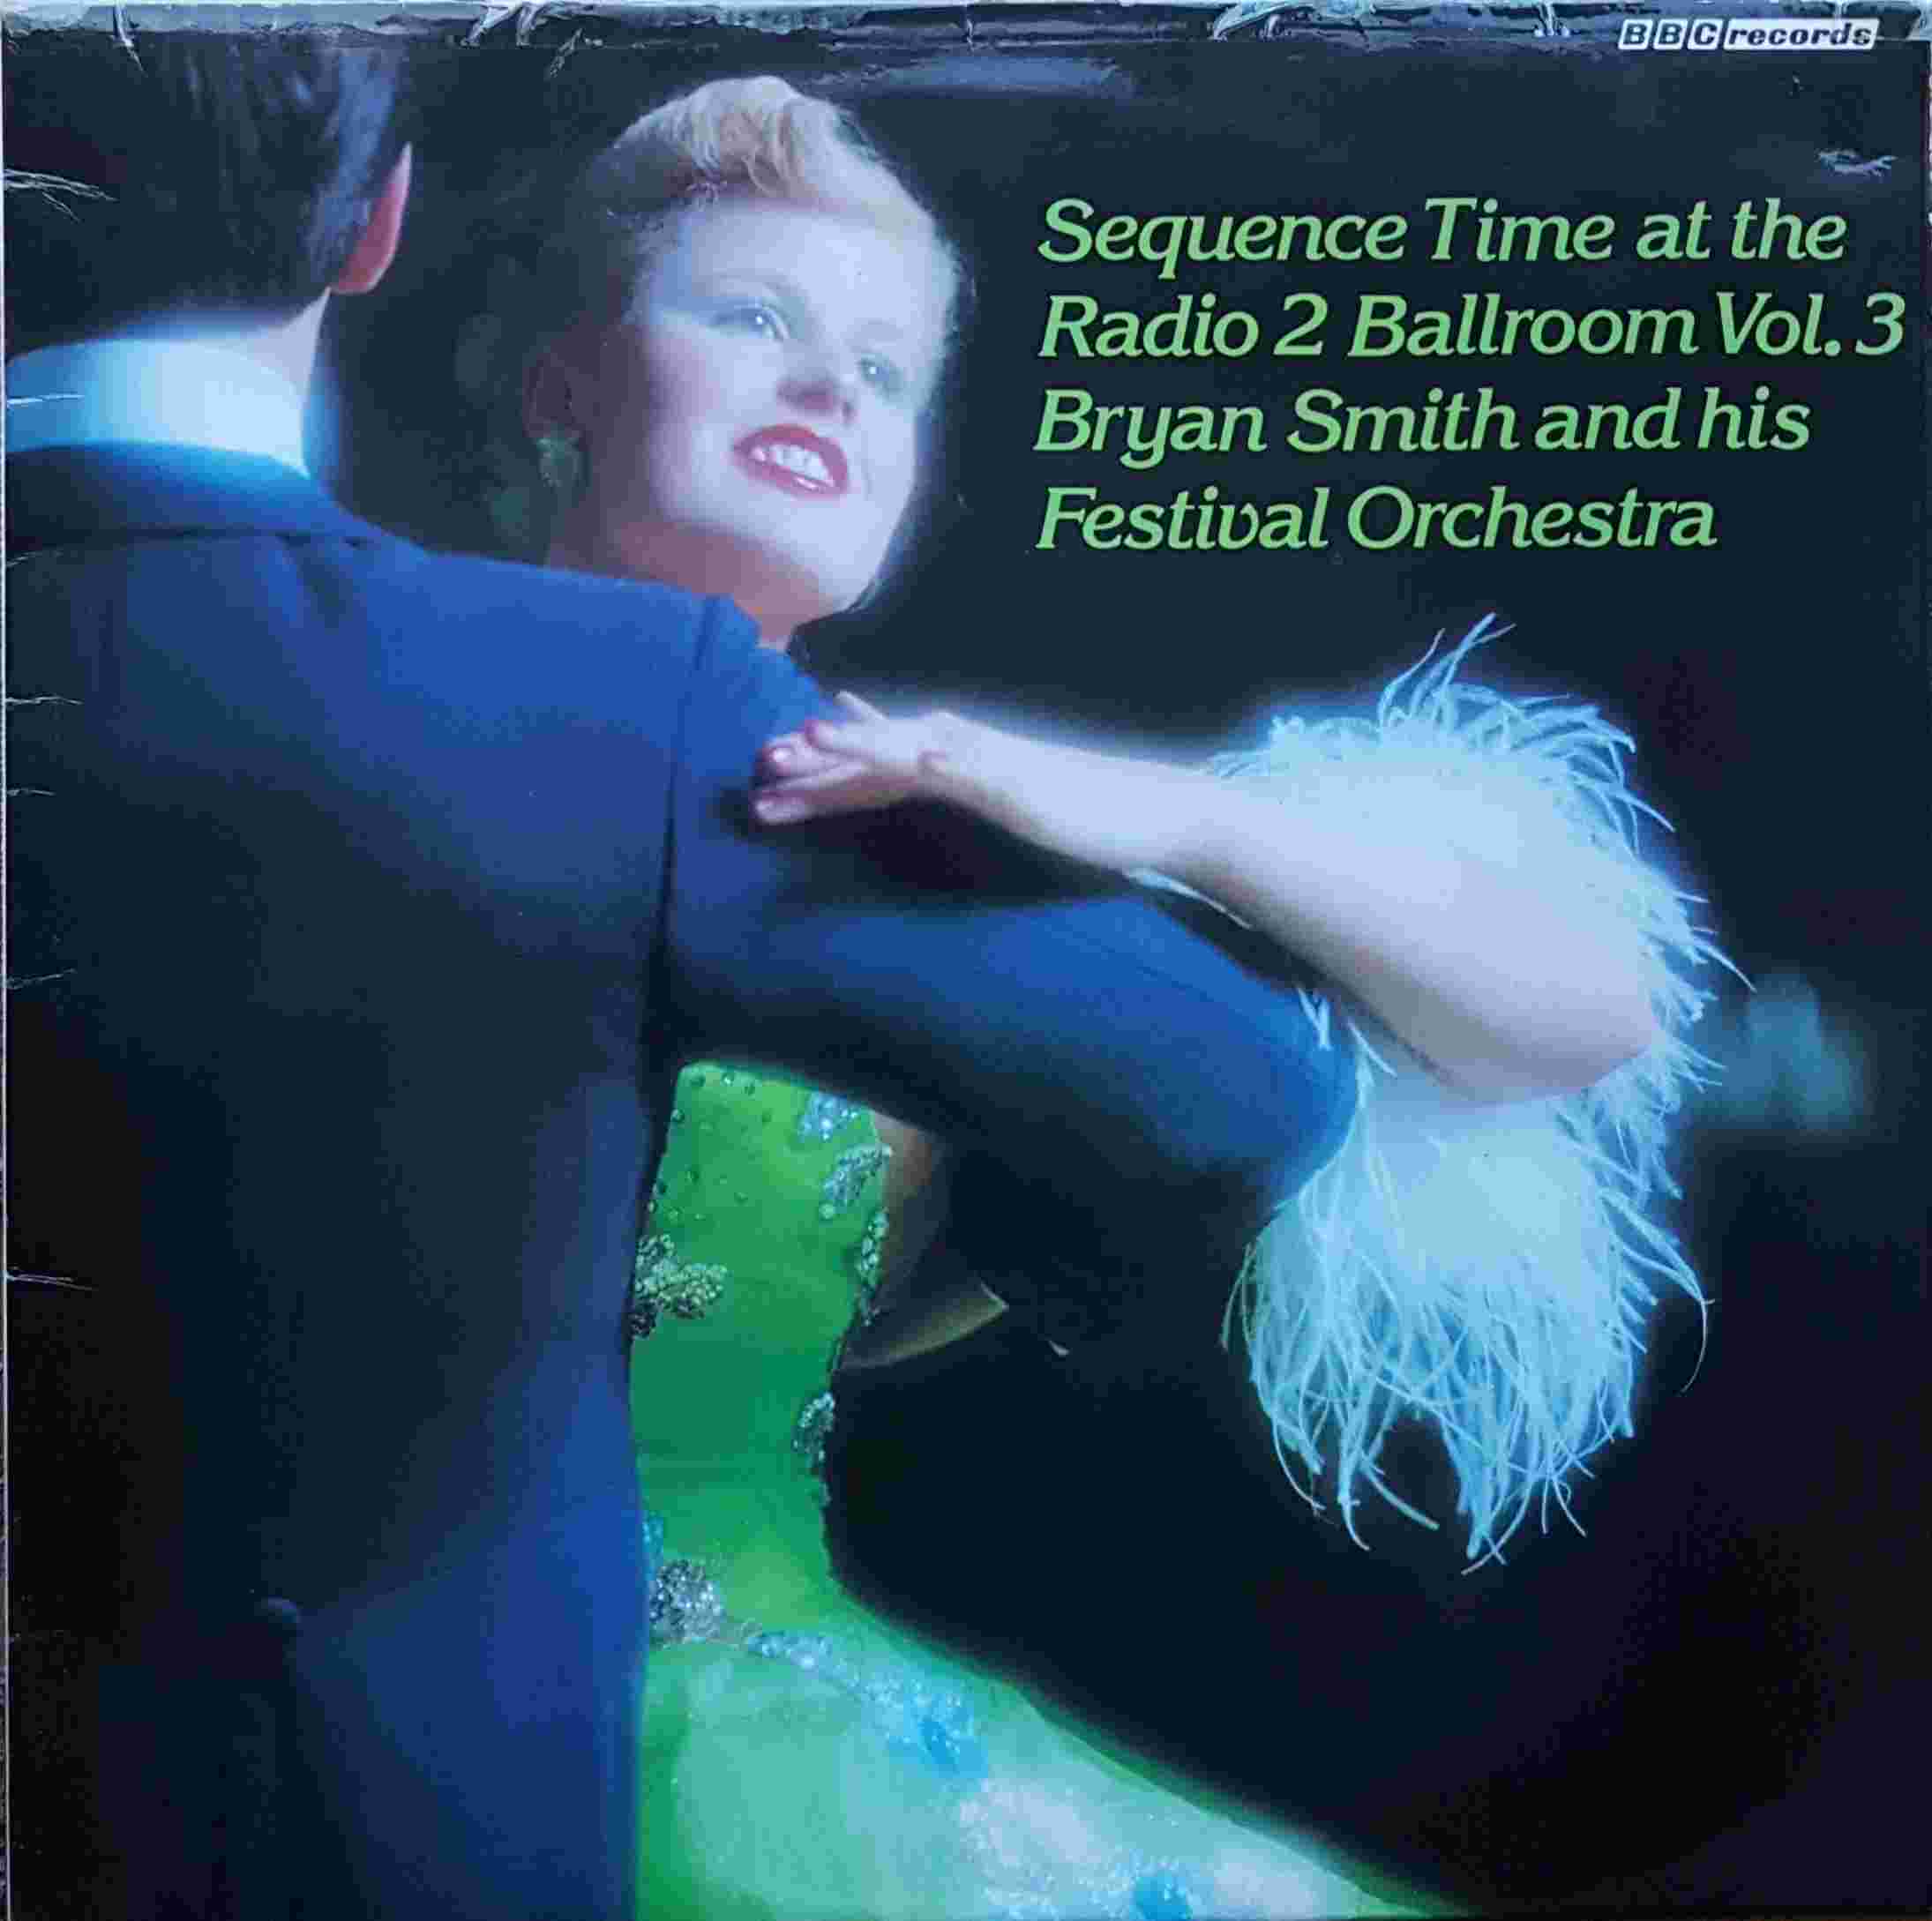 Picture of REC 358 Sequence time at the Radio 2 ballroom - Volume 3 by artist Various from the BBC albums - Records and Tapes library